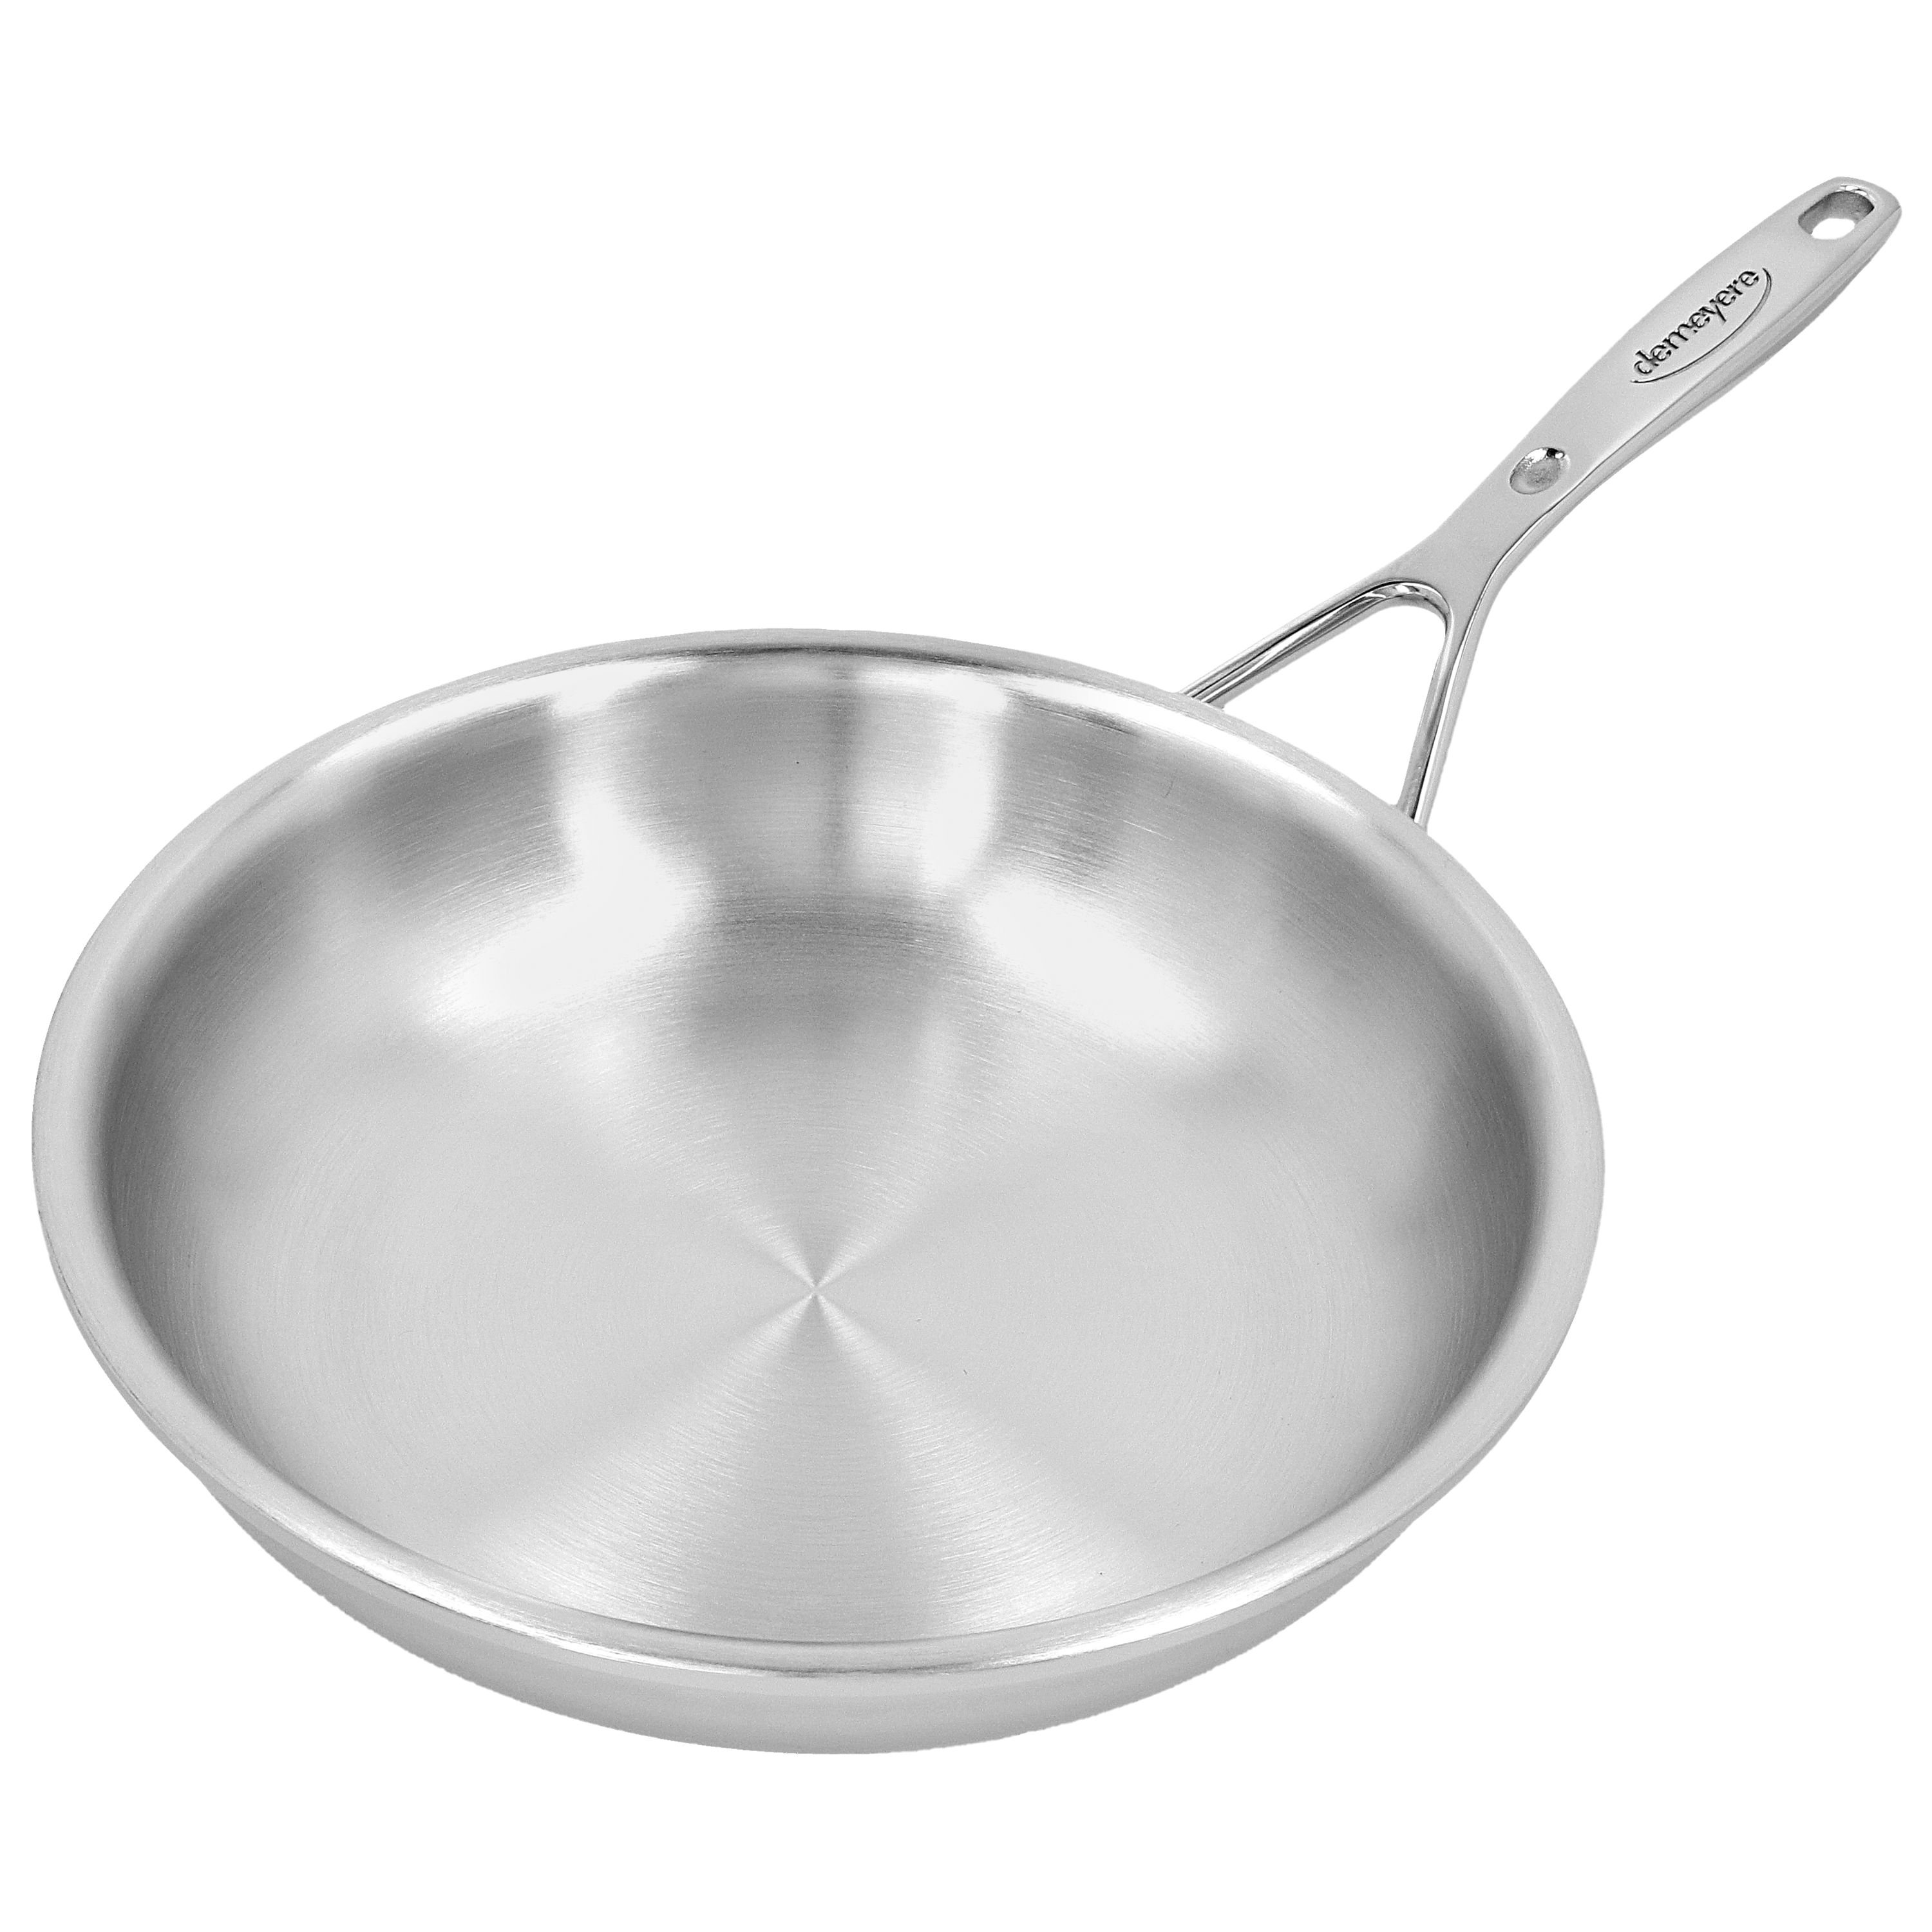  DWELL SIX  Hammered Silver Fry Pan (9.5 Inch): Home & Kitchen